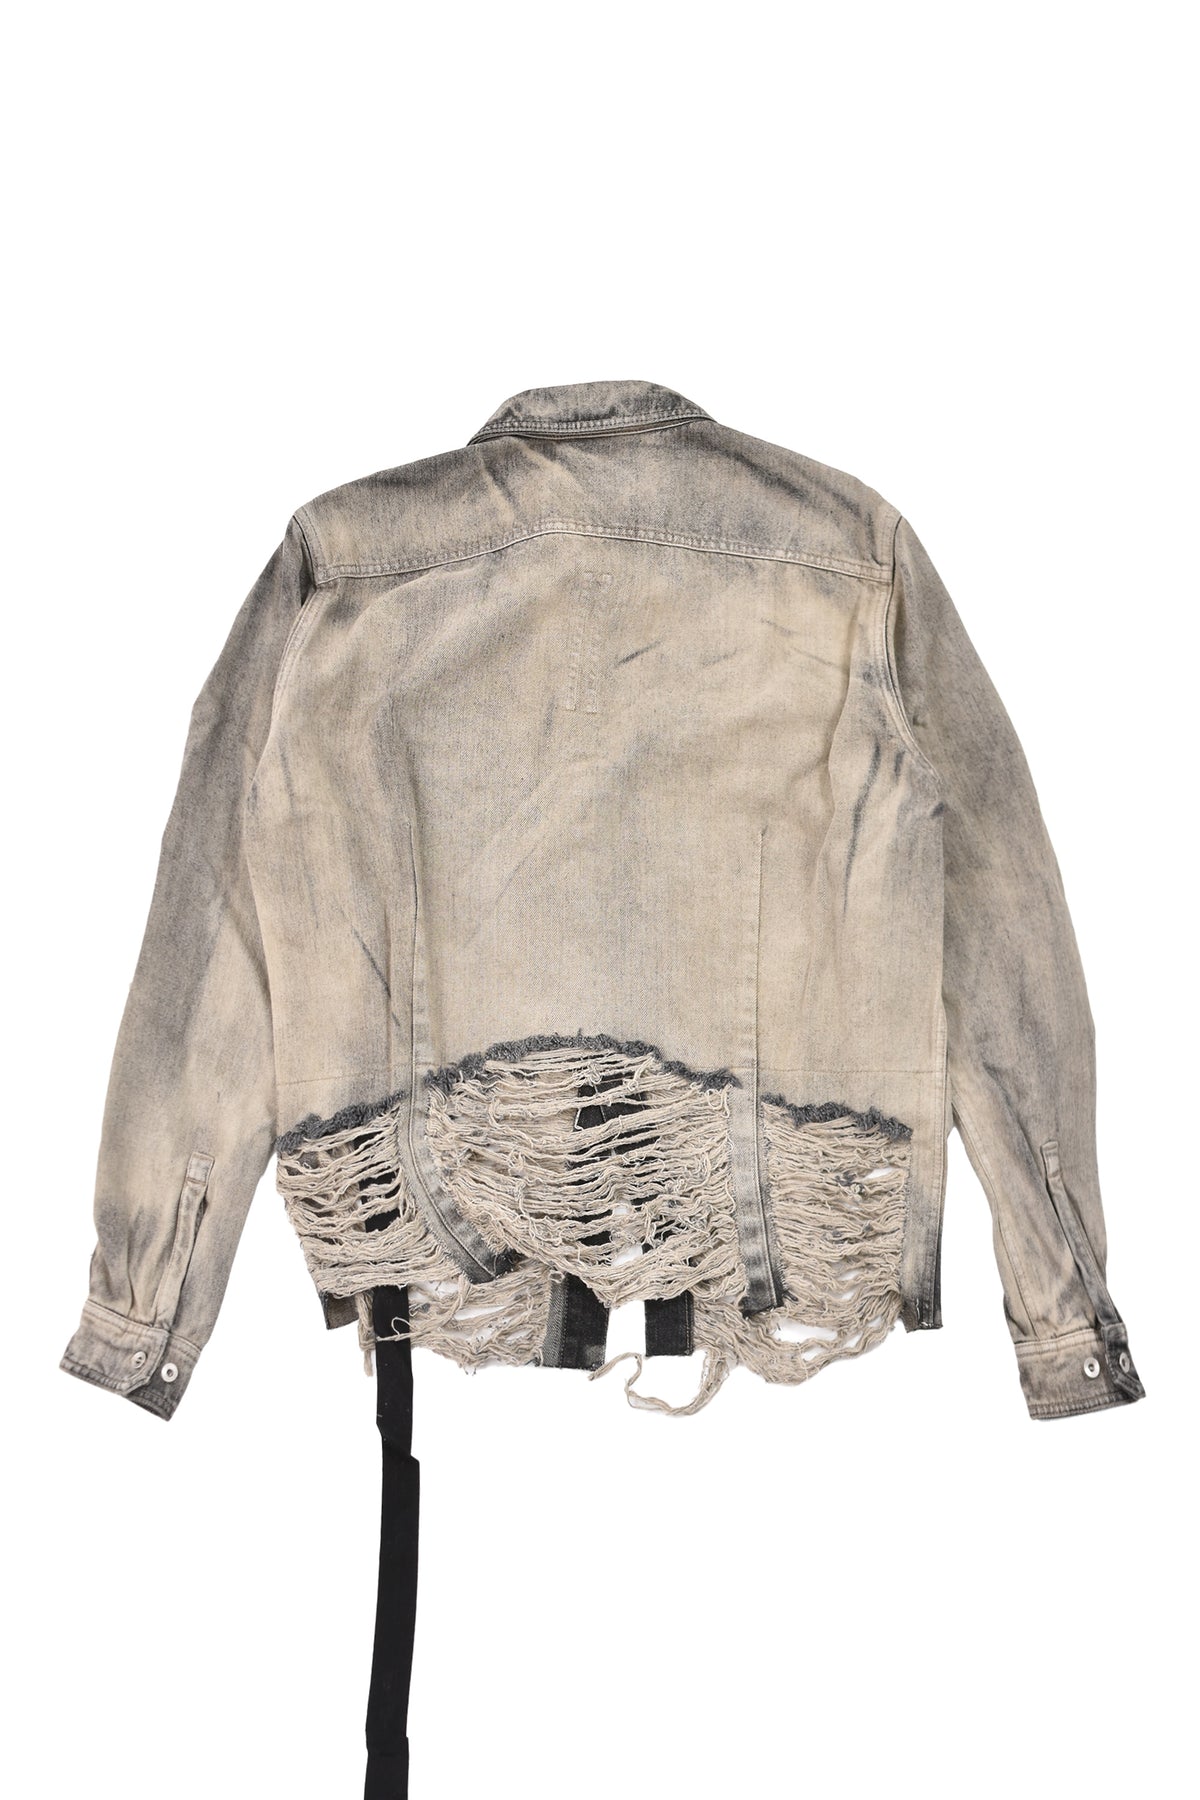 Rick Owens DRKSHDW CAPE SLEEVE CROPPED OUTERSHIRT / MINERAL FRINGED